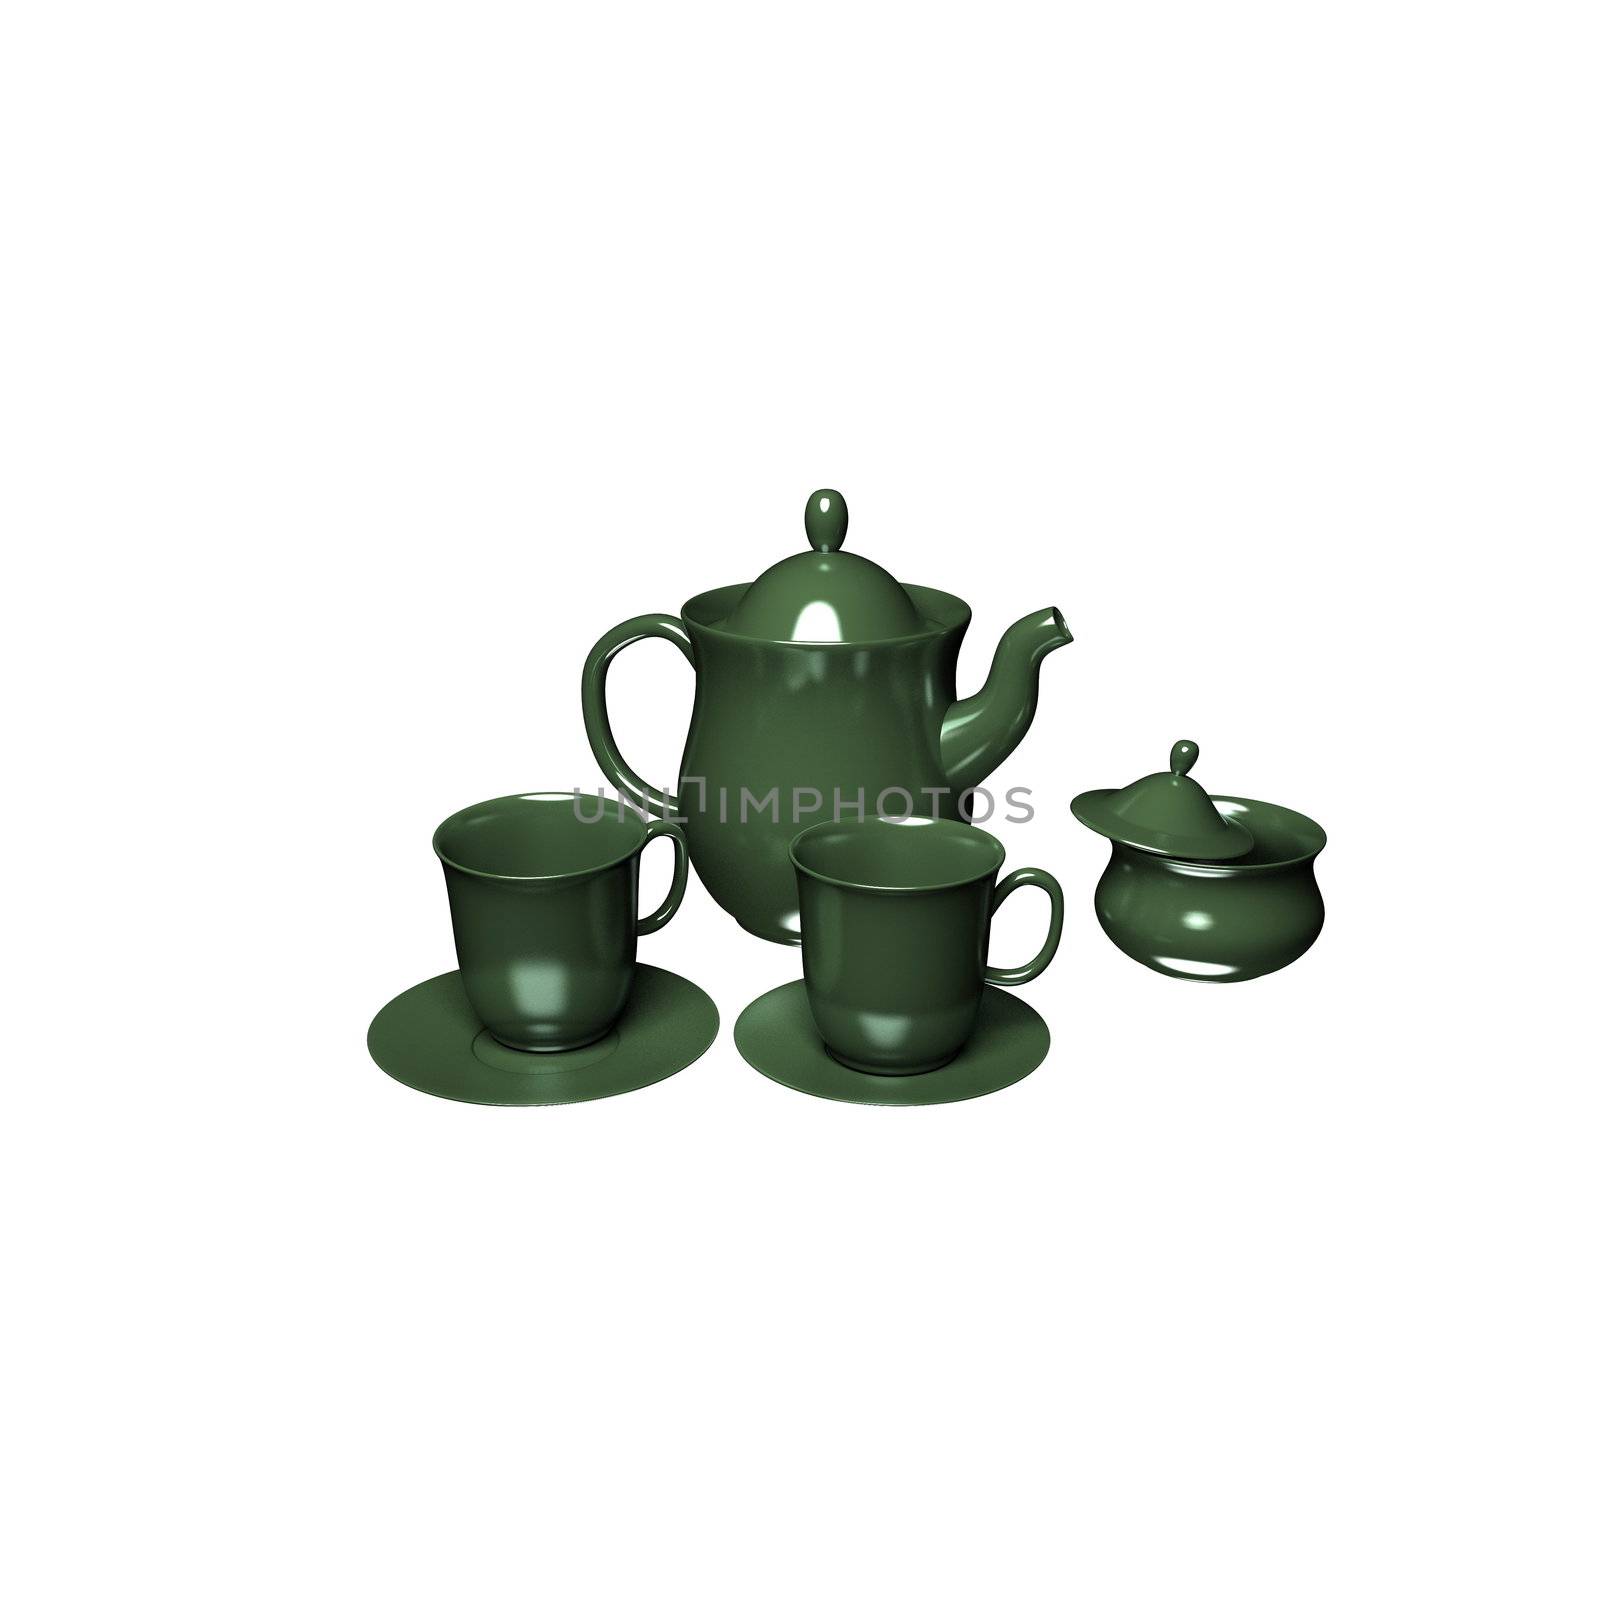 Teapot and two tea cup by ozaiachin